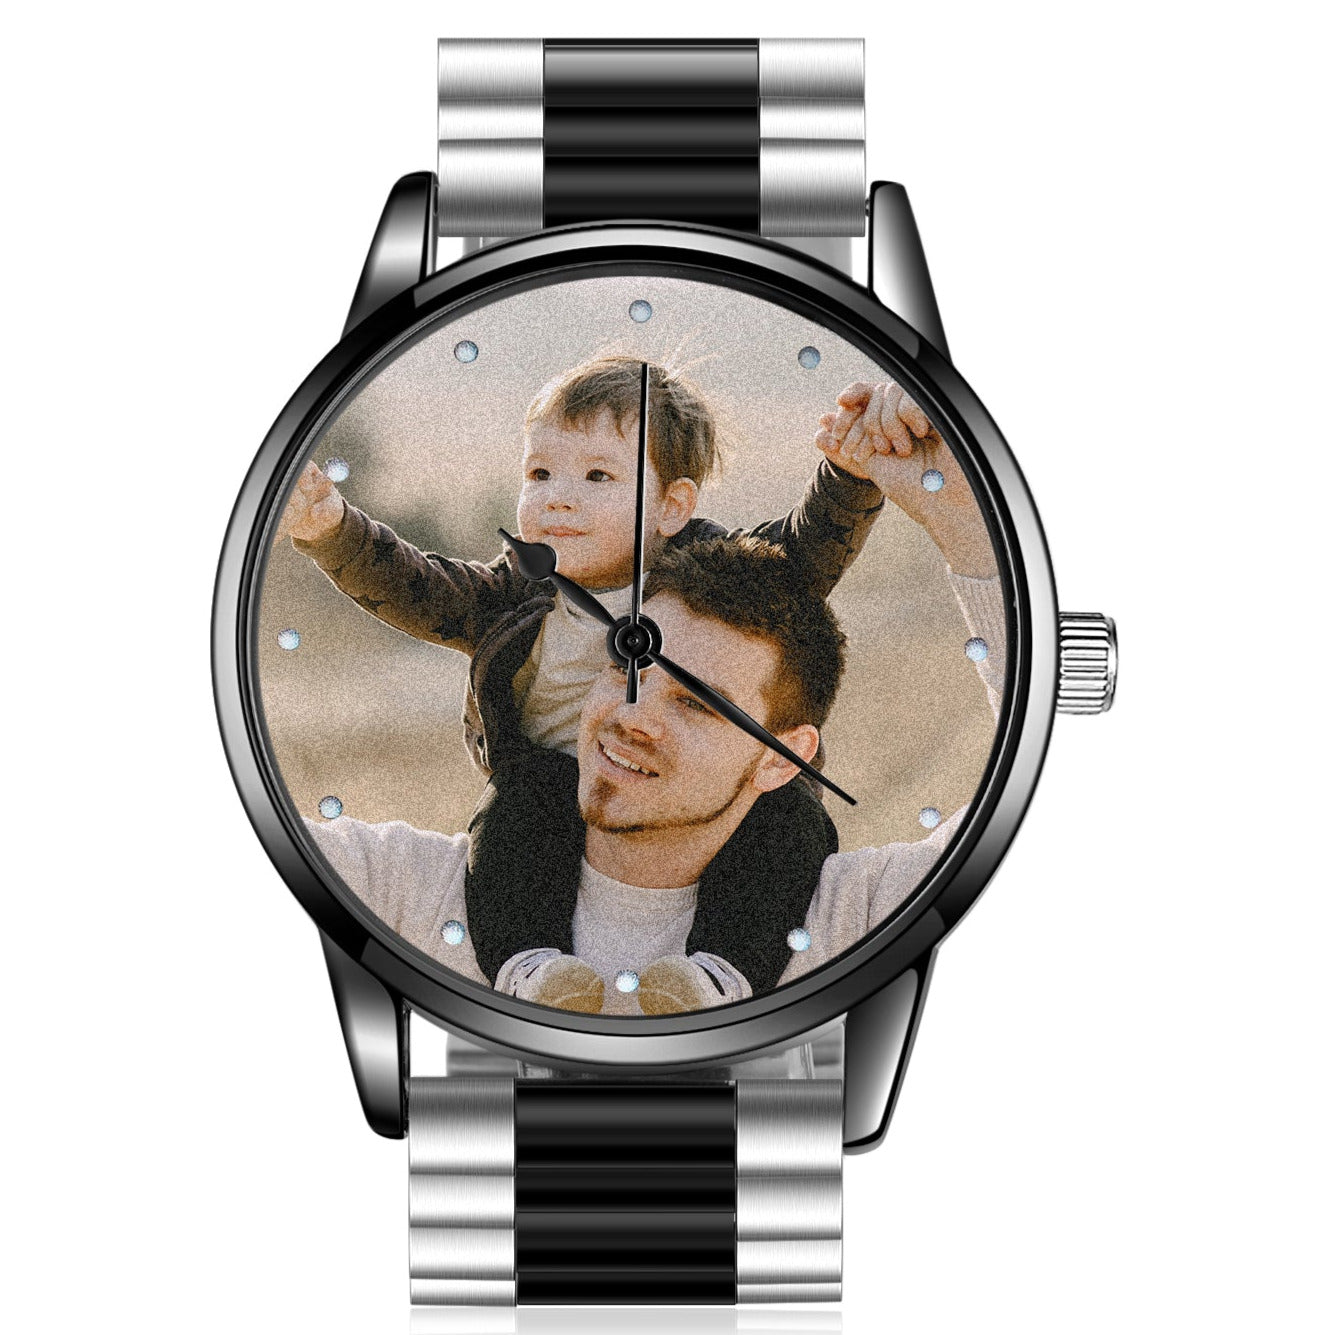 ThinkEngraved Custom watch Personalized Men's Custom Photo Watch With Engraving Father's Day Boyfriend